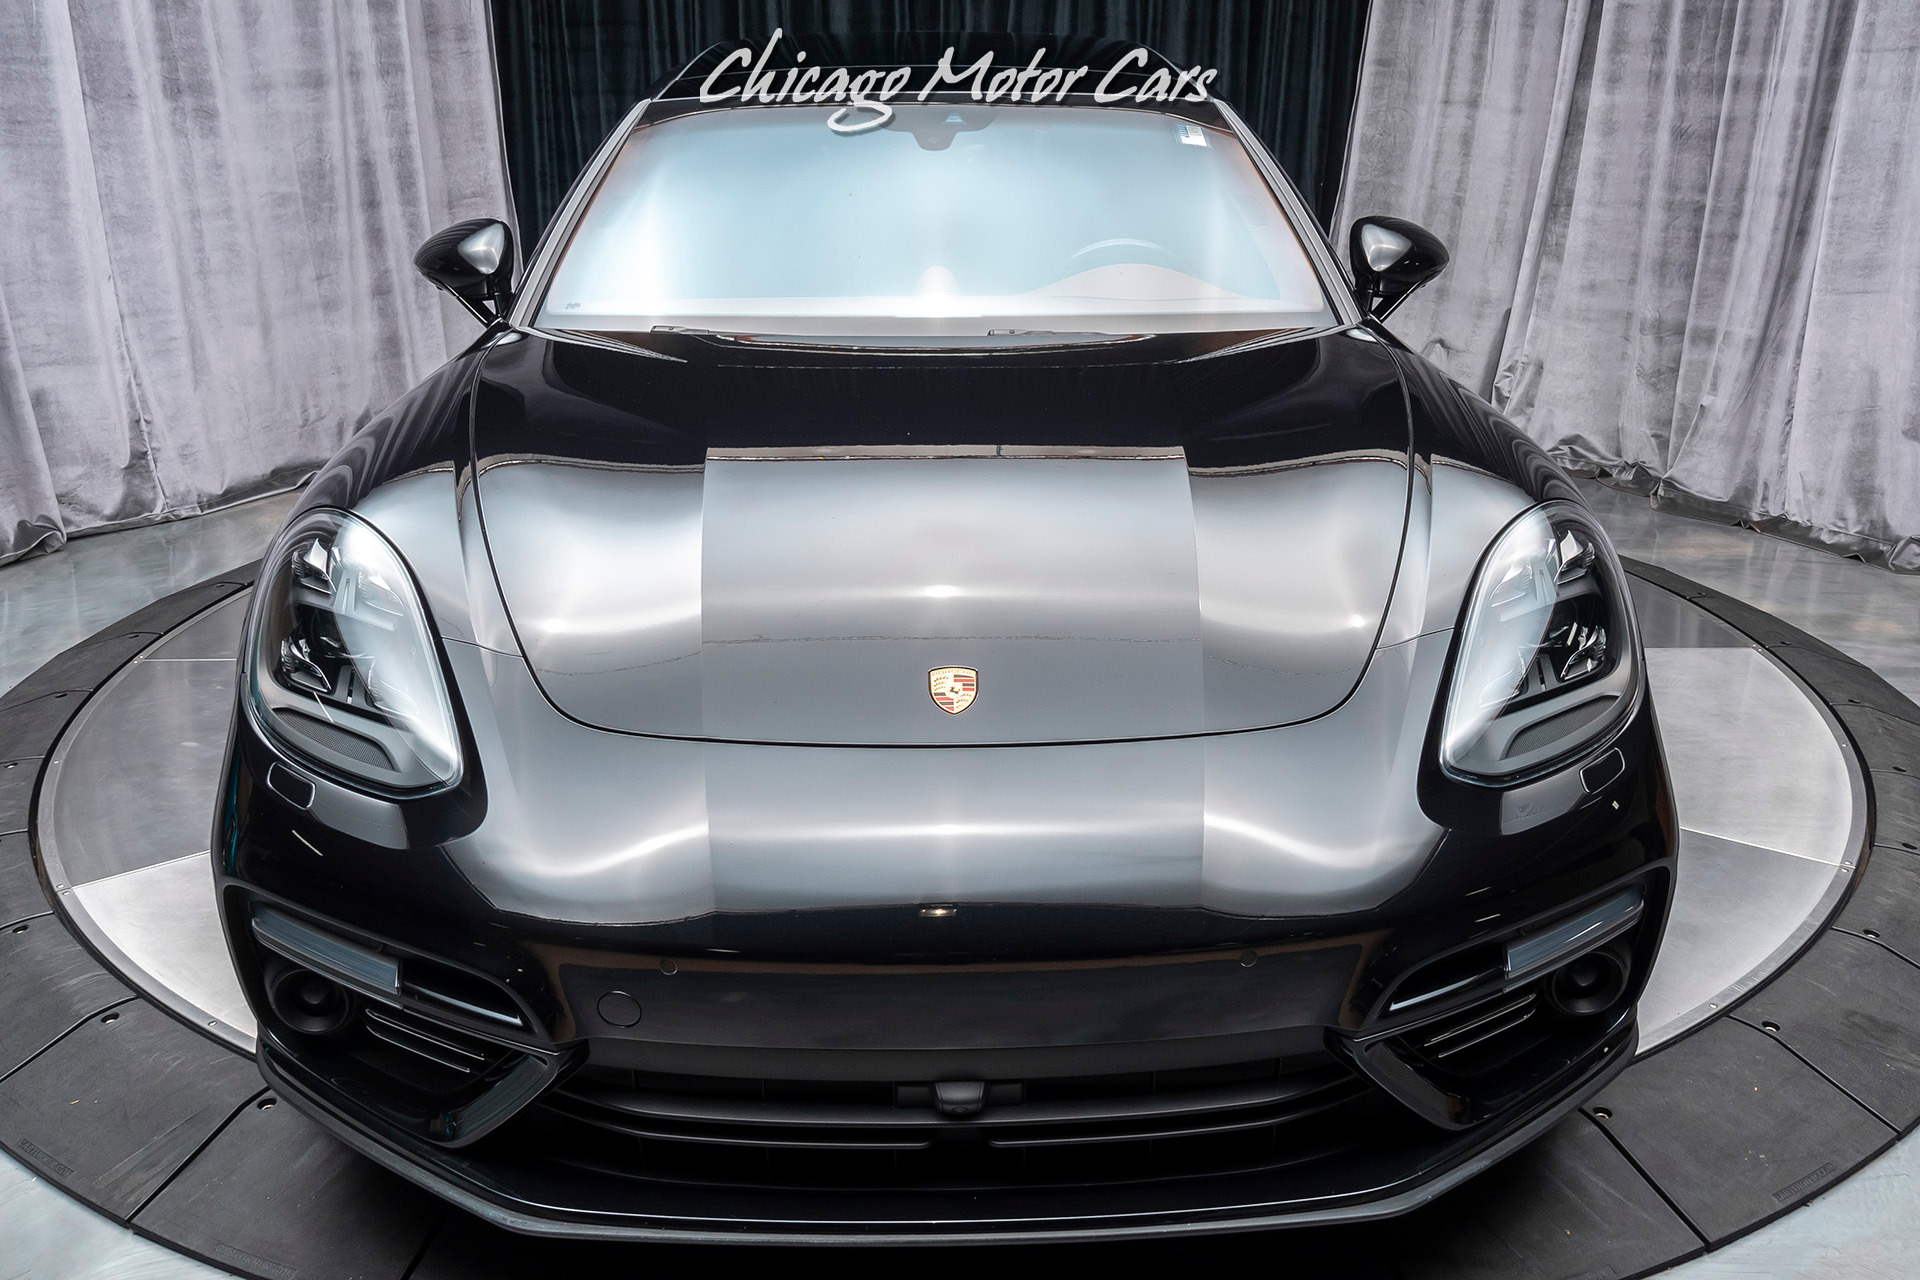 Used-2018-Porsche-Panamera-Turbo-Executive-MSRP-204k-LOADED-WFACTORY-OPTIONS